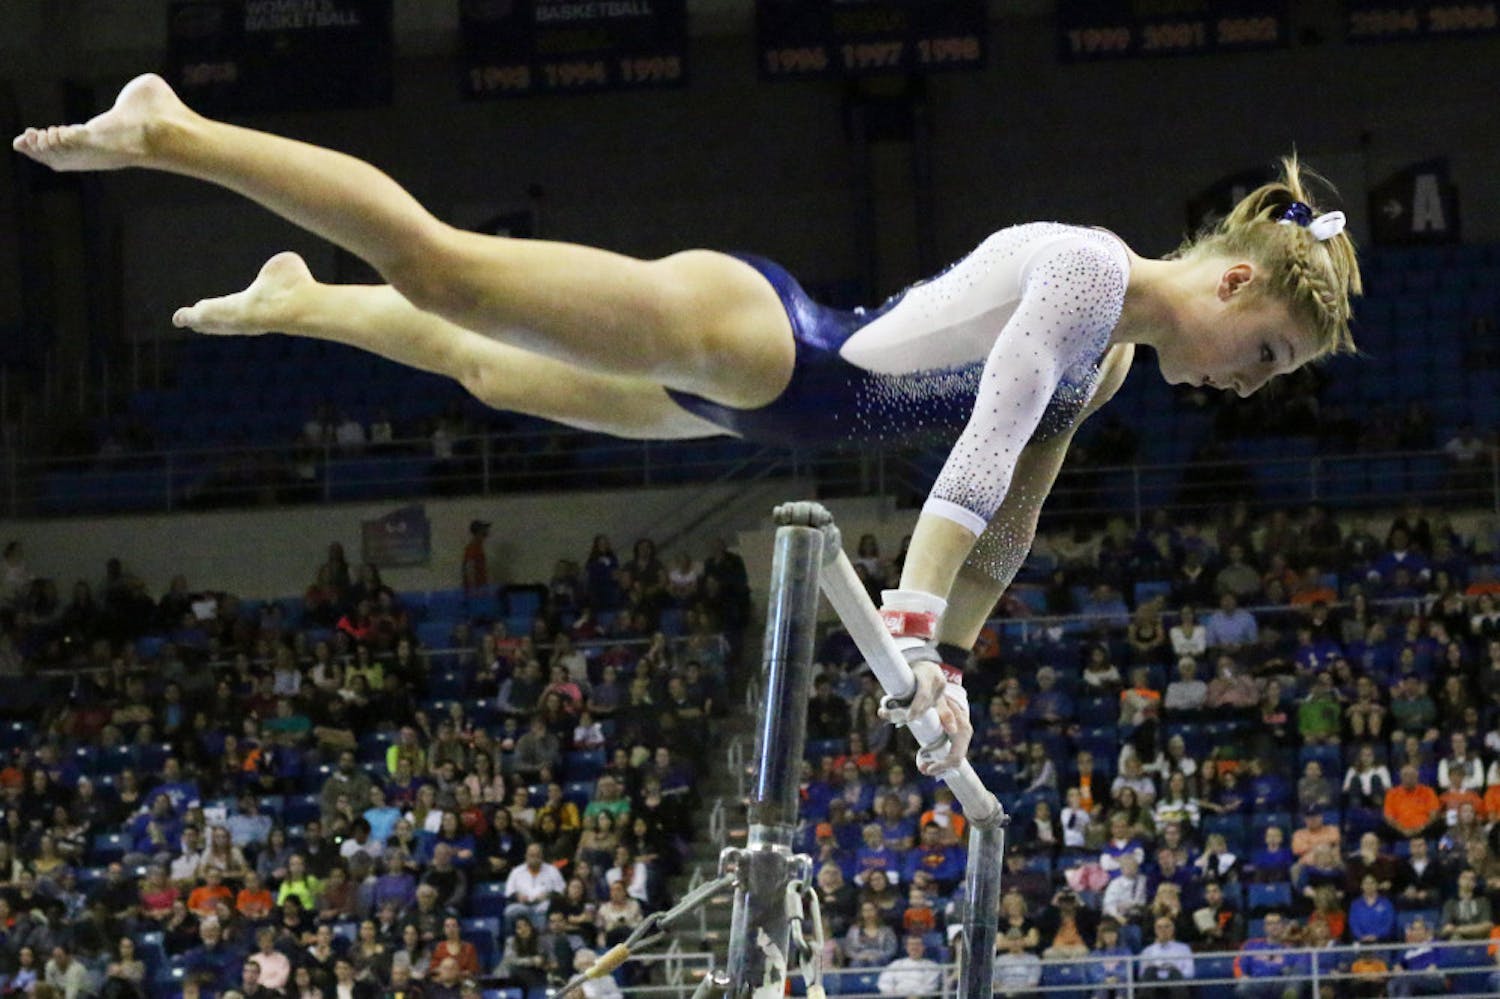 Freshman Alex McMurtry competes on the uneven parallel bars during Florida's win against Auburn on Friday in the O'Connell Center.